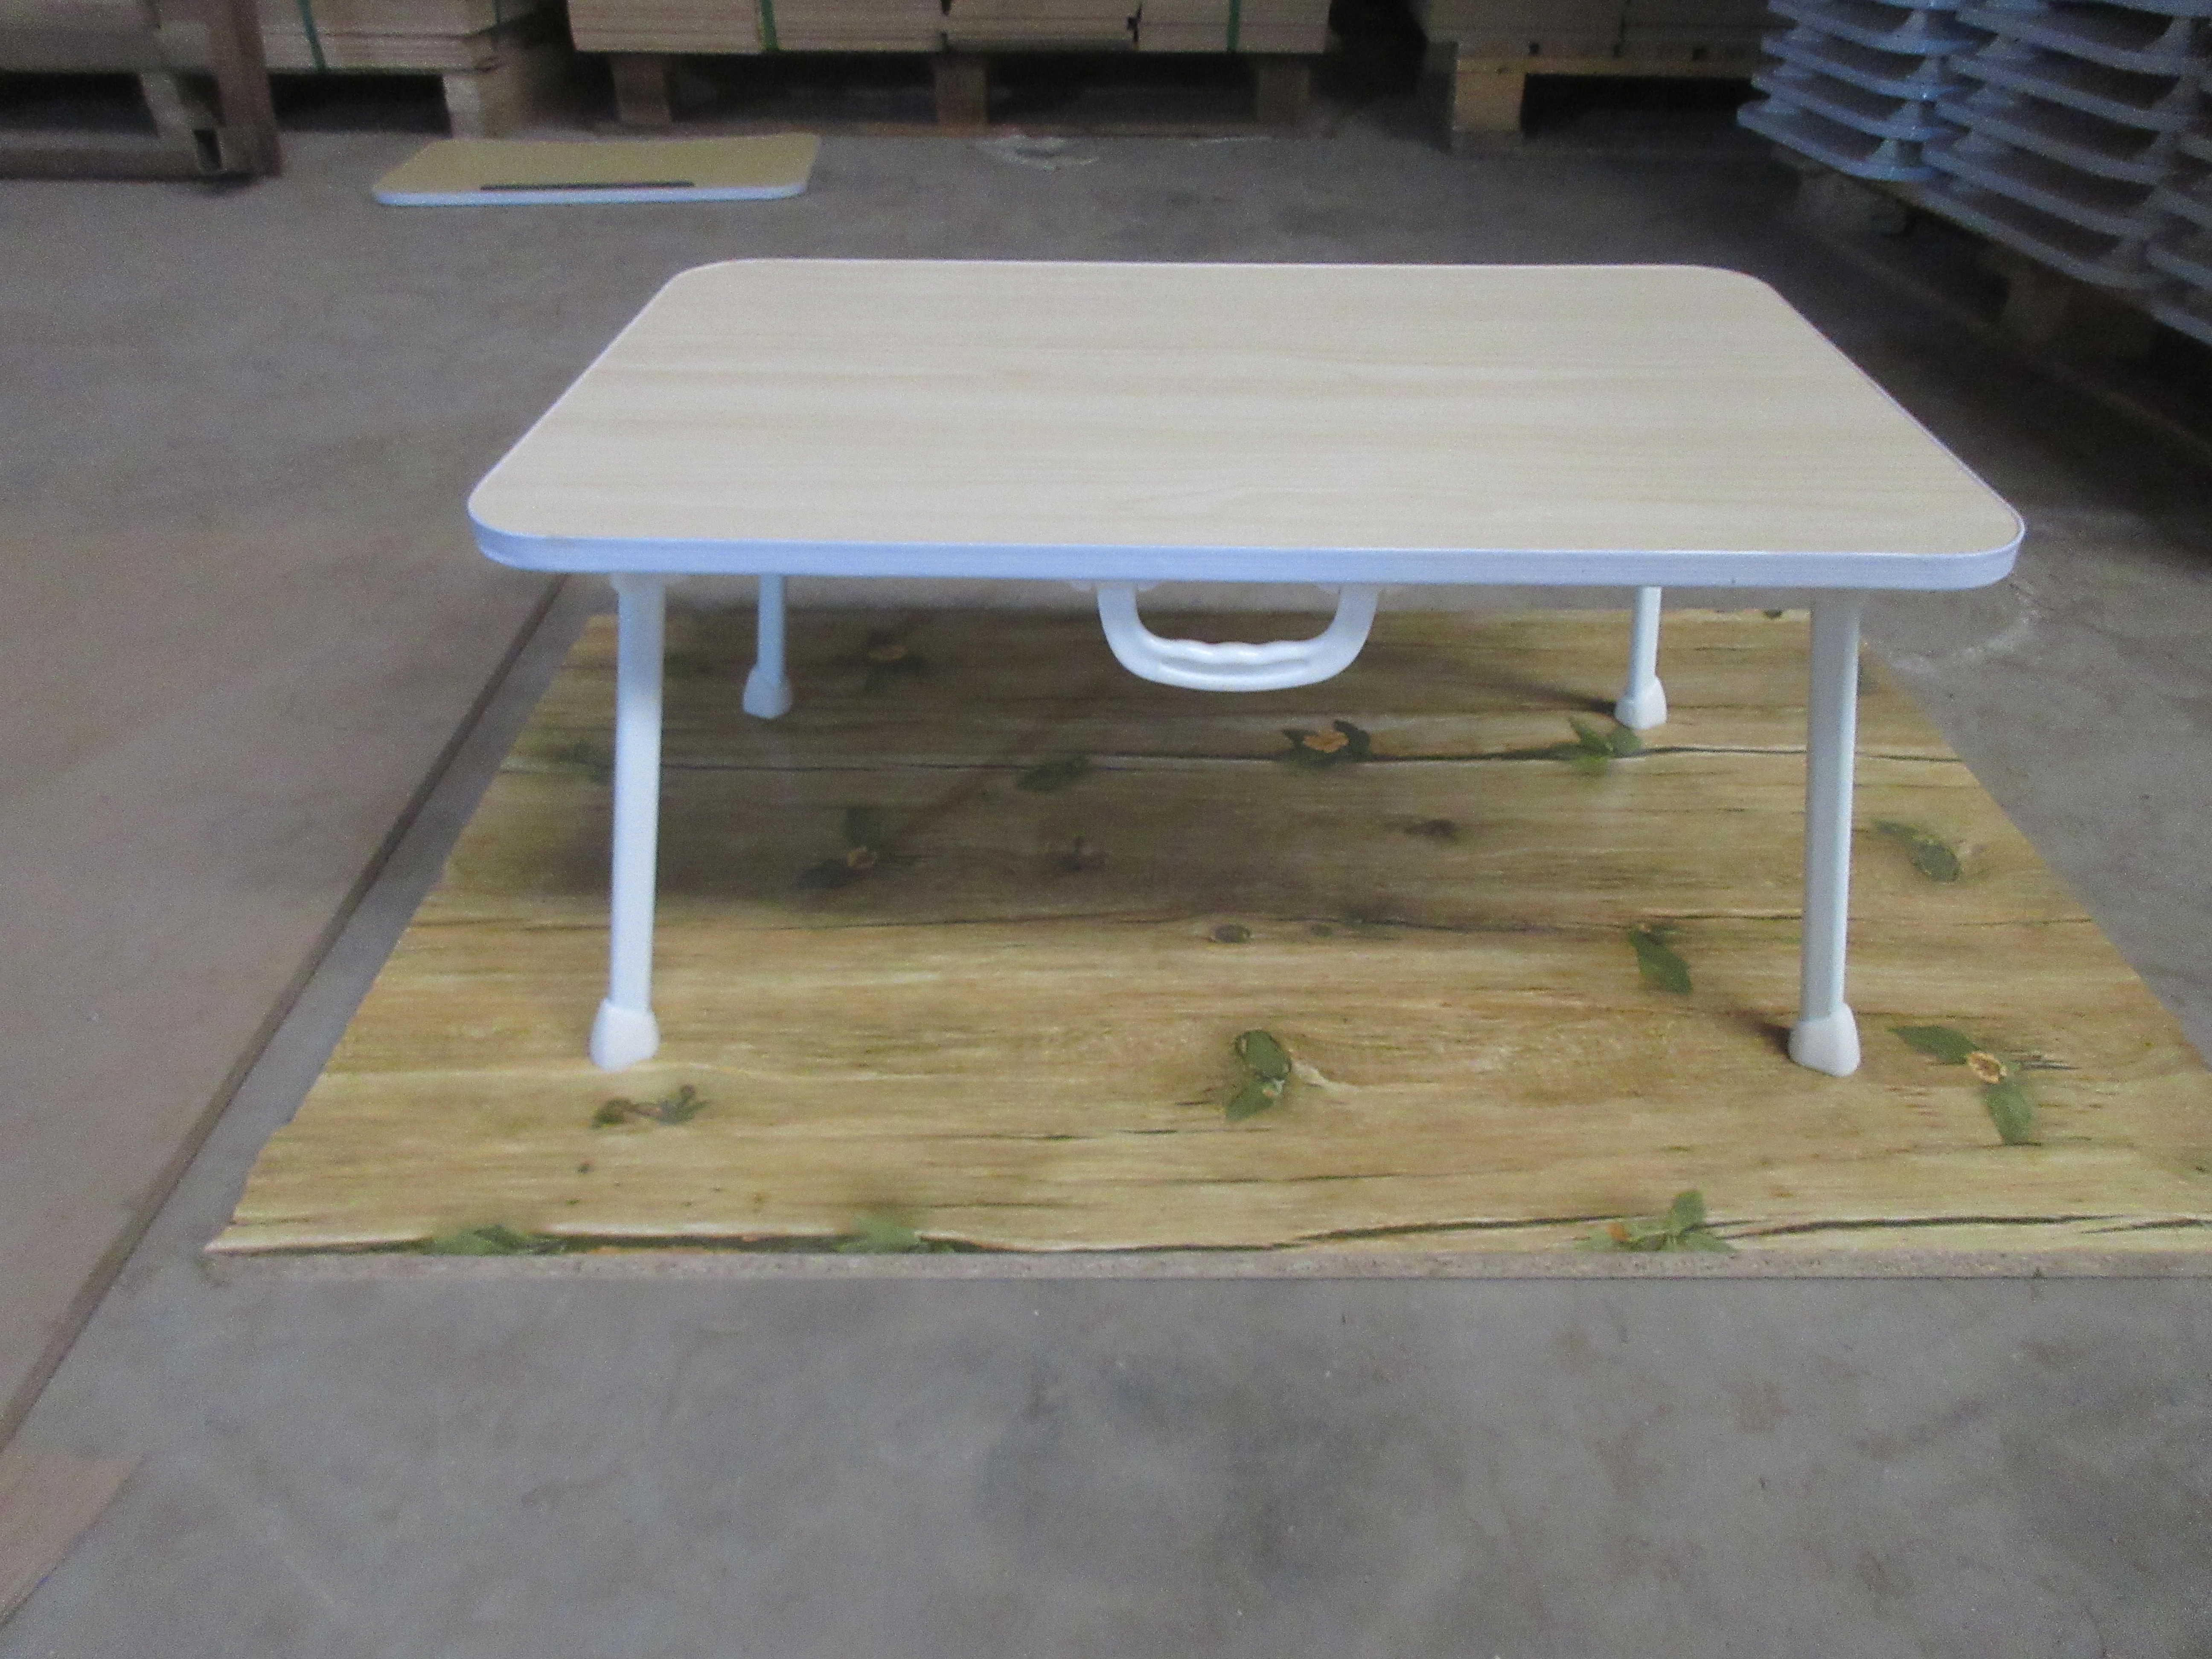 Inspection Standards And Test Methods for Folding Tables Third Party Inspection Service Folding Tables Inspection